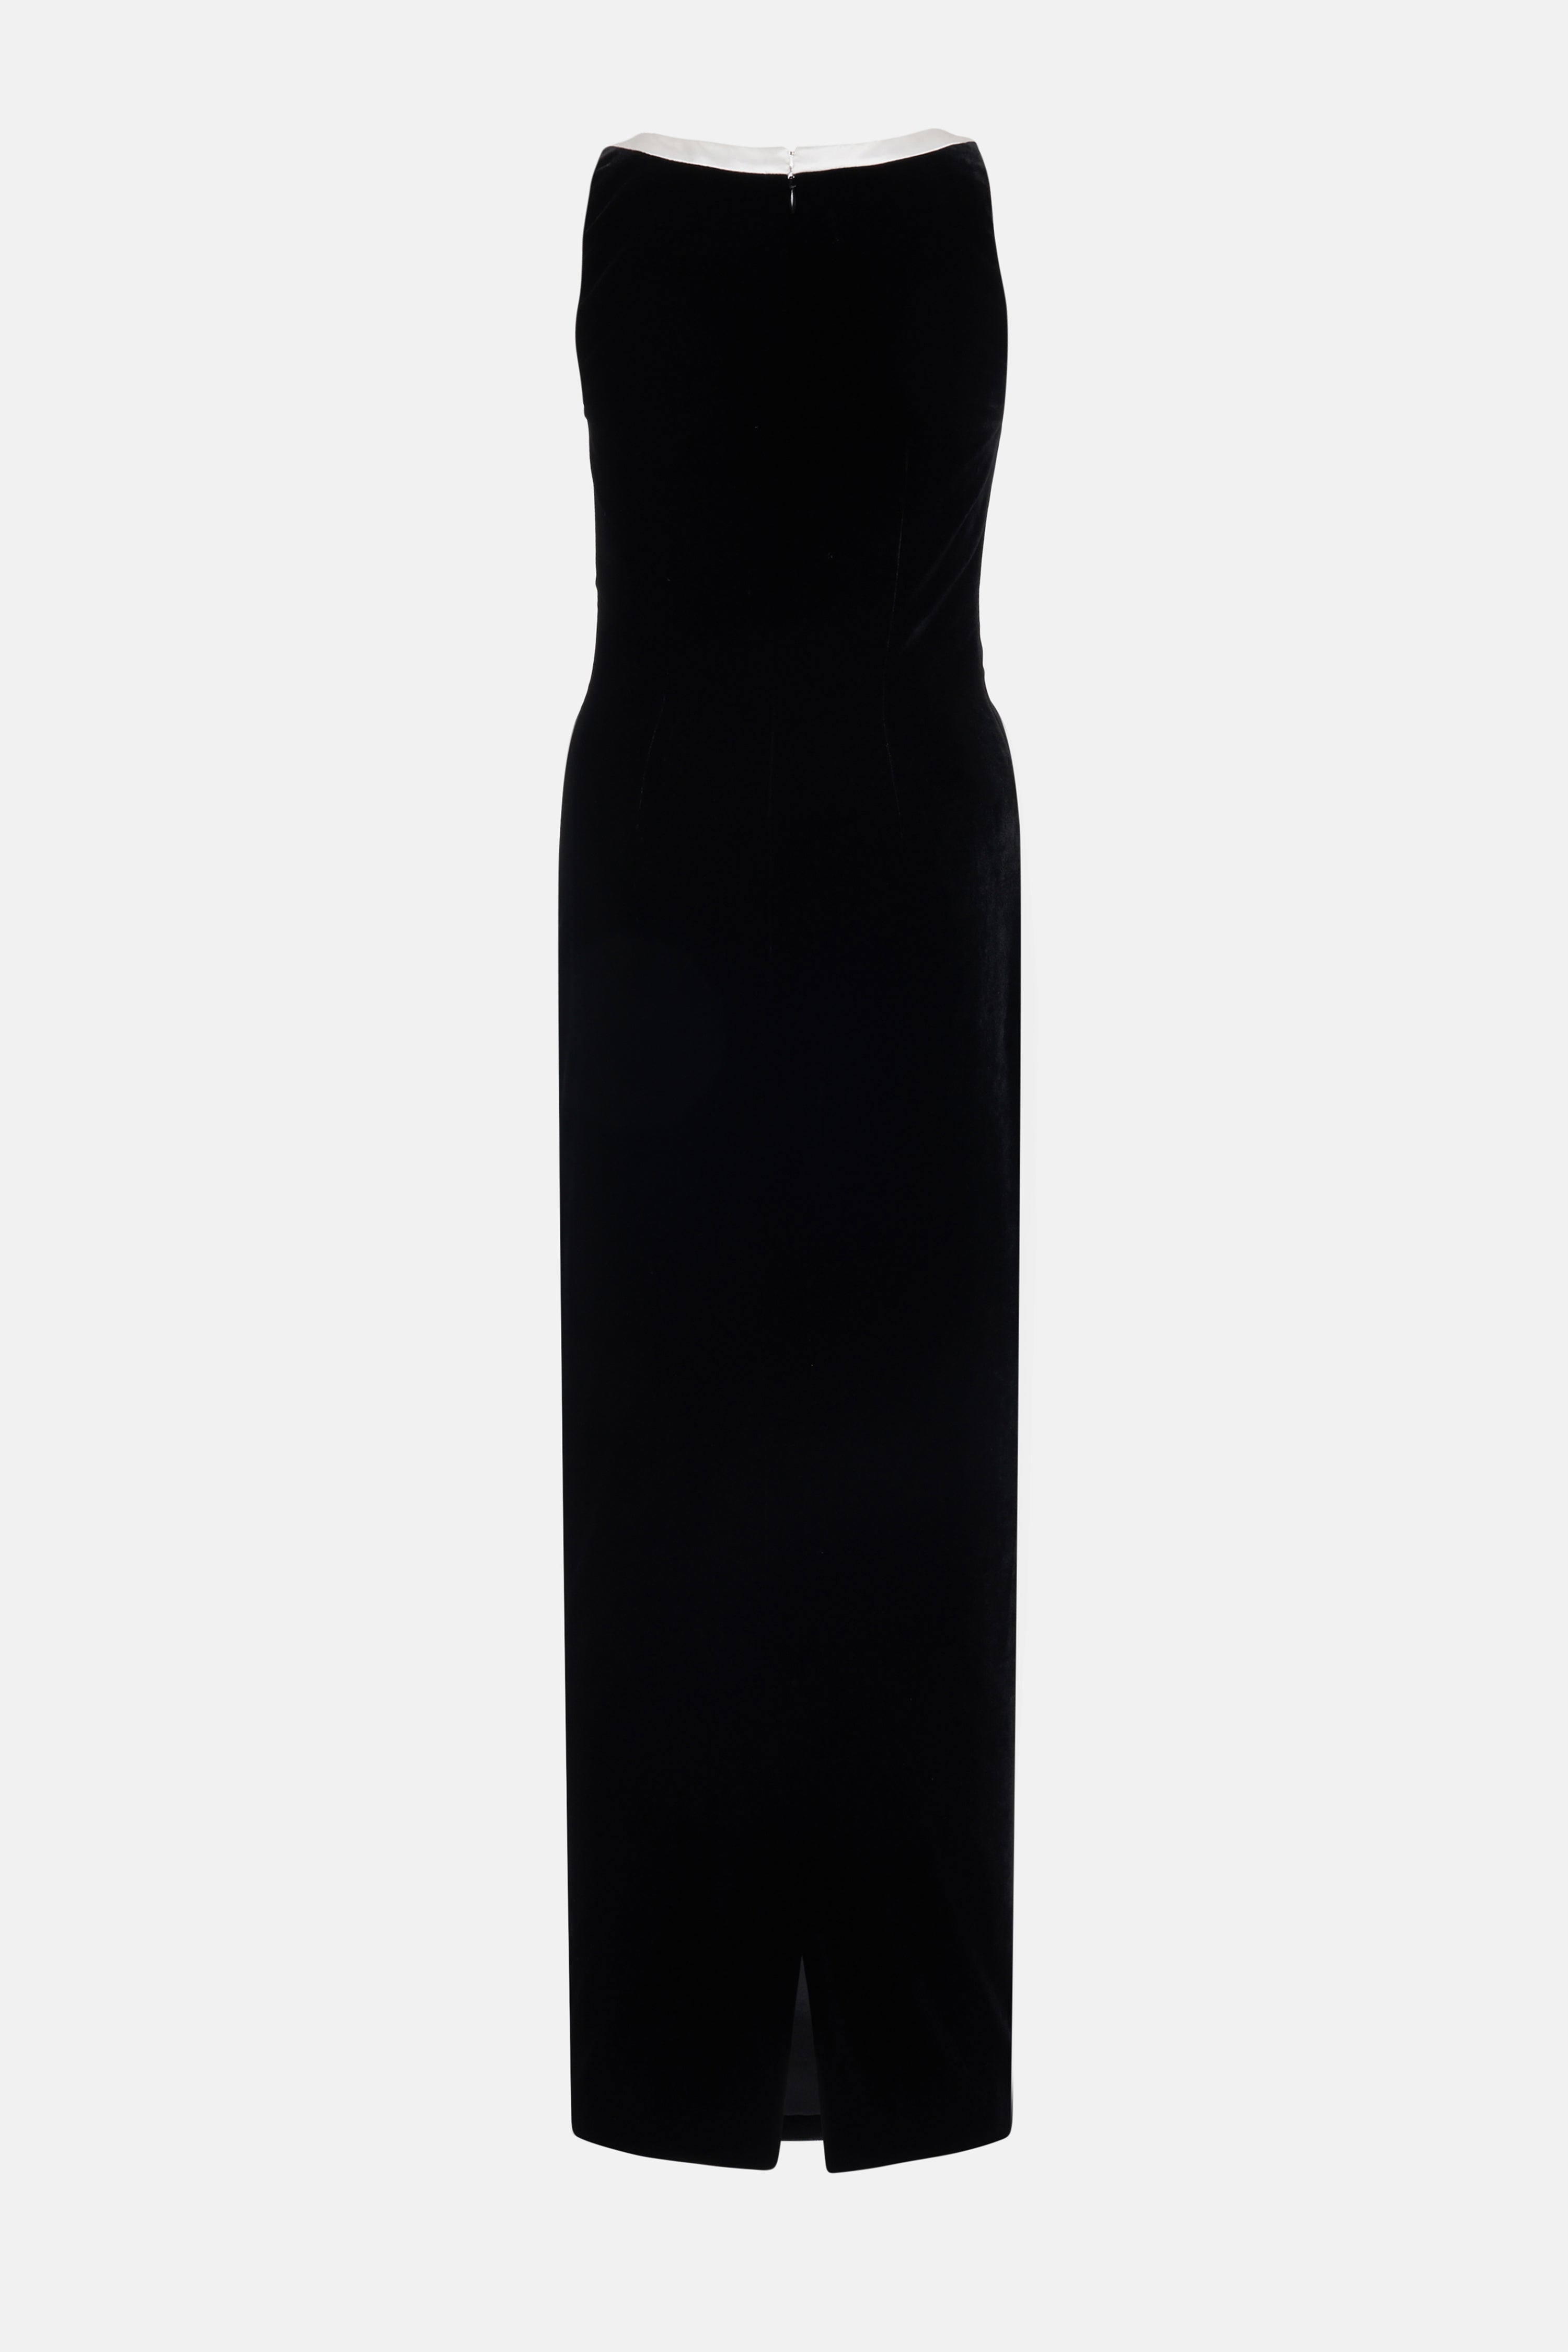 VELVET EVENING DRESS WITH CONTRASTING DUCHESSE BOW